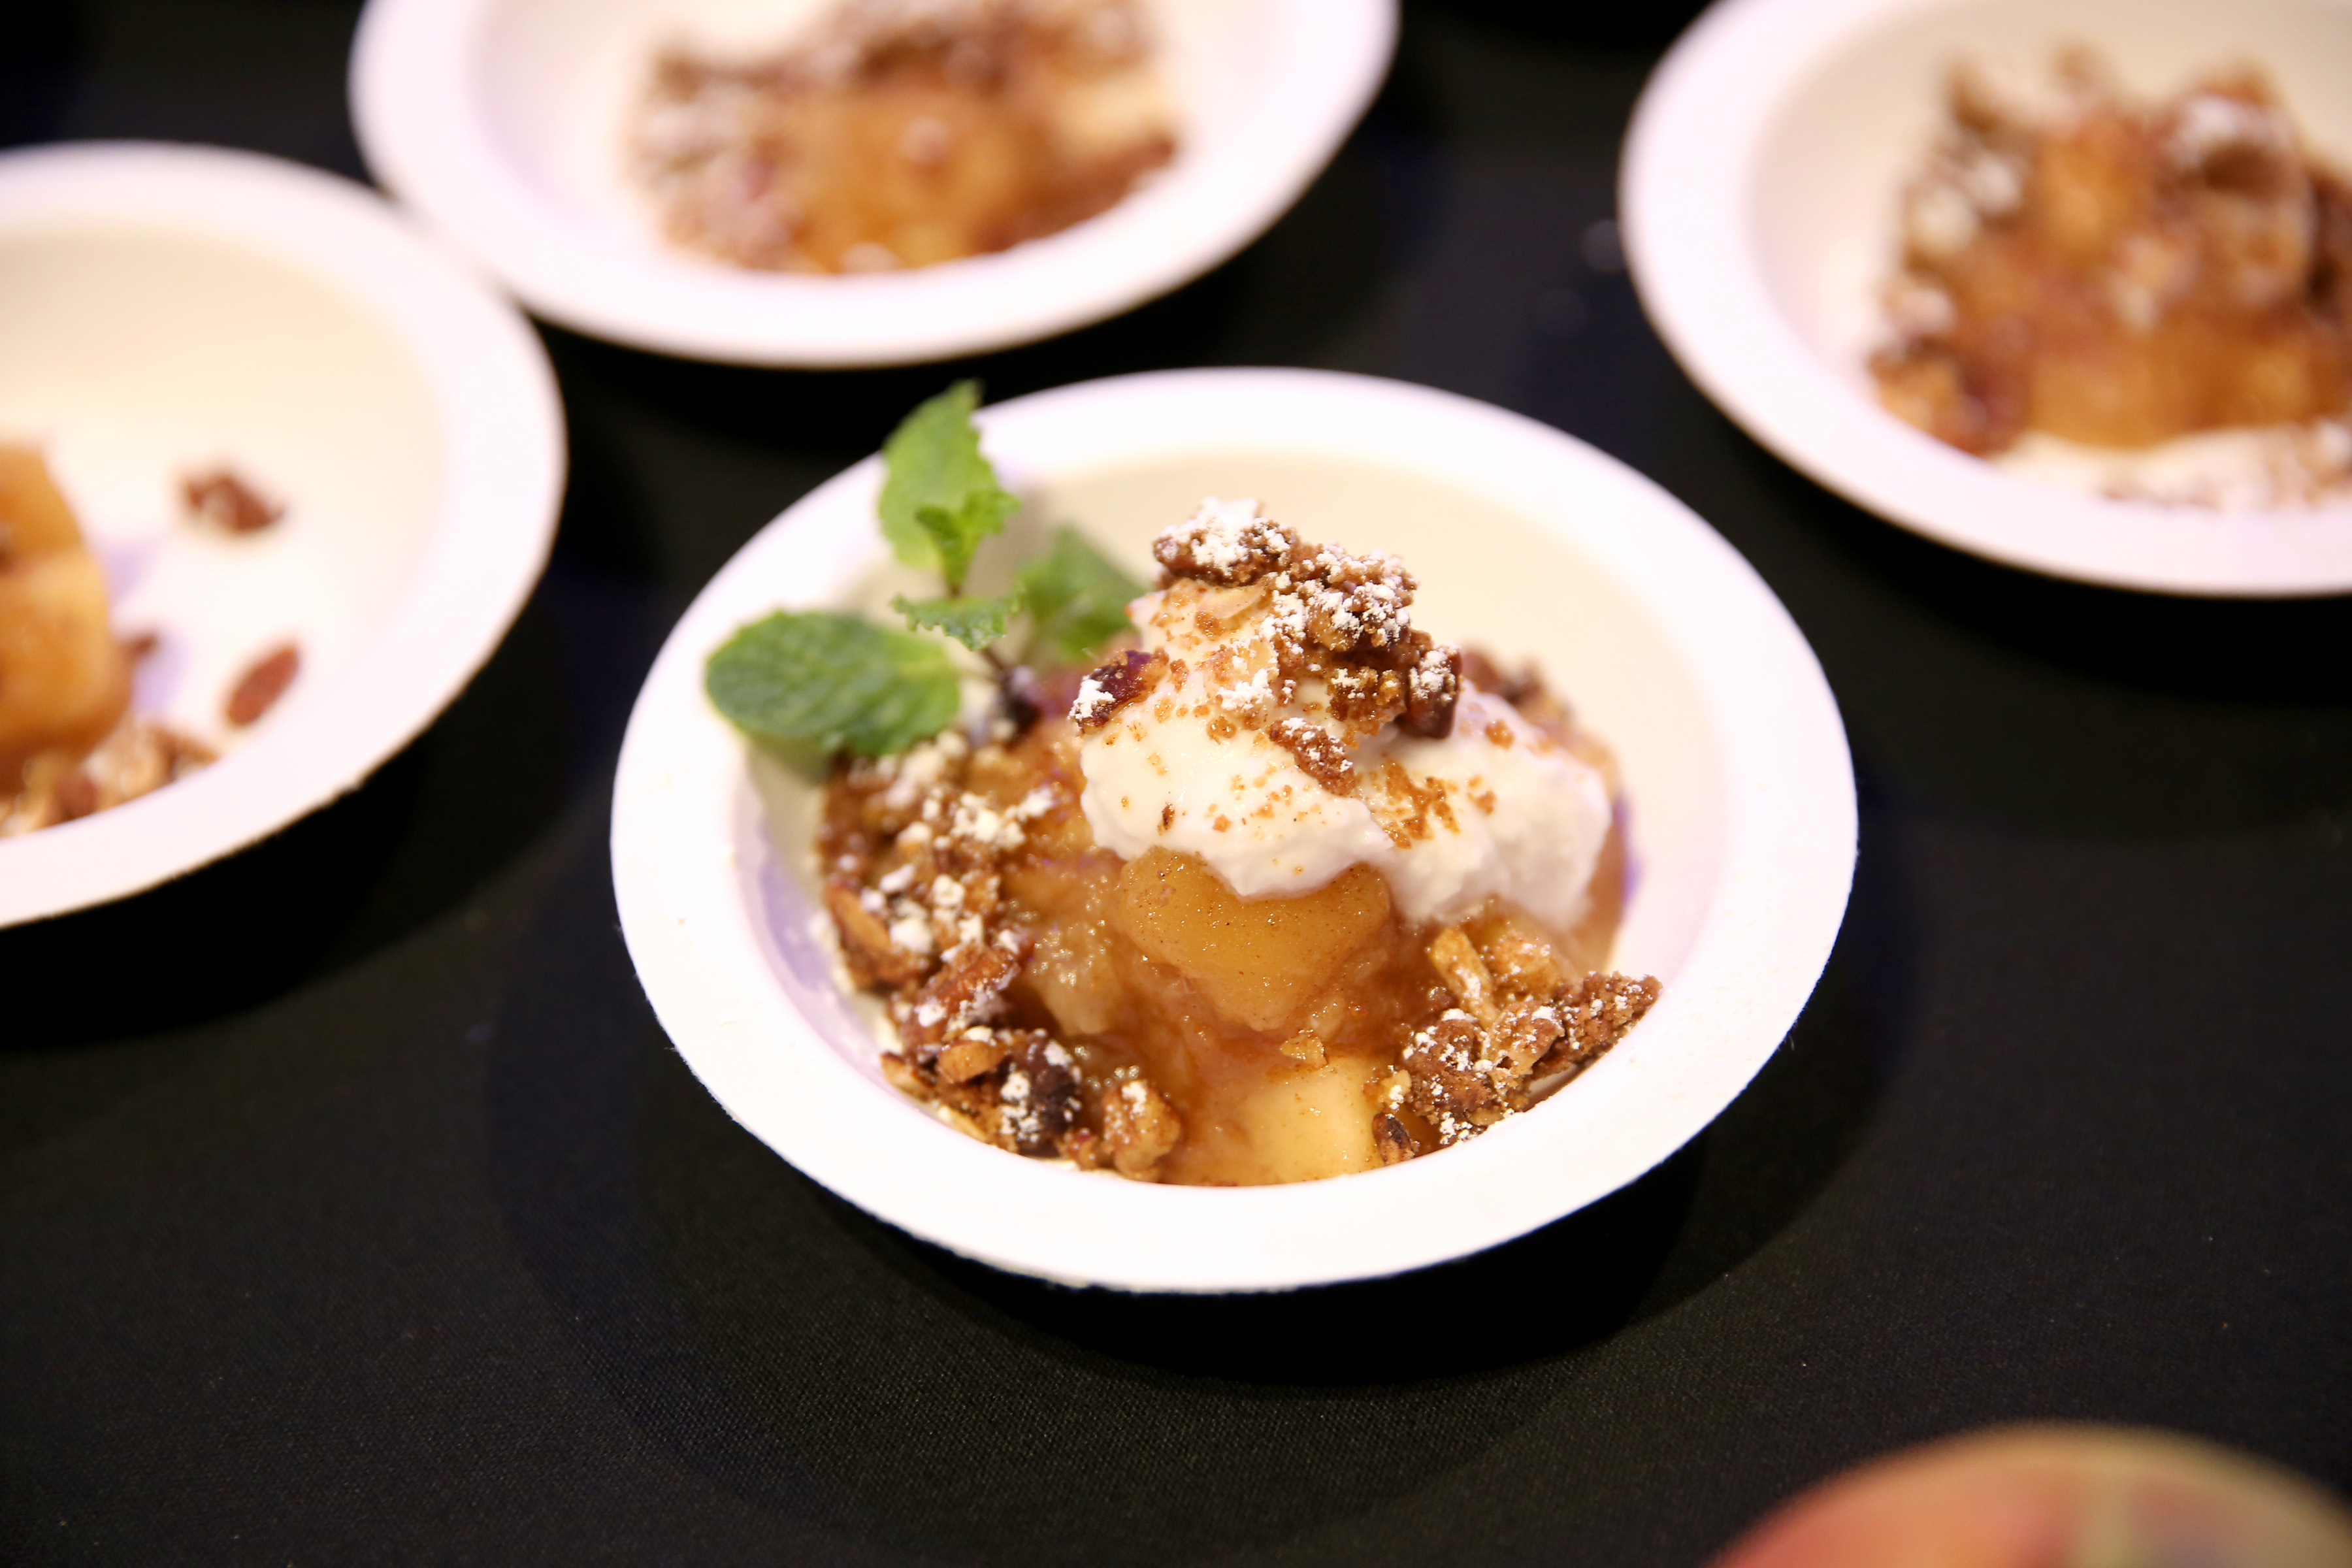 <p>This tasty topping is great when served alongside vanilla ice cream. <a href="http://www.taste.com.au/recipes/34873/apple+and+fig+compote">Check out this recipe for apple fig compote from Taste.com.</a></p>